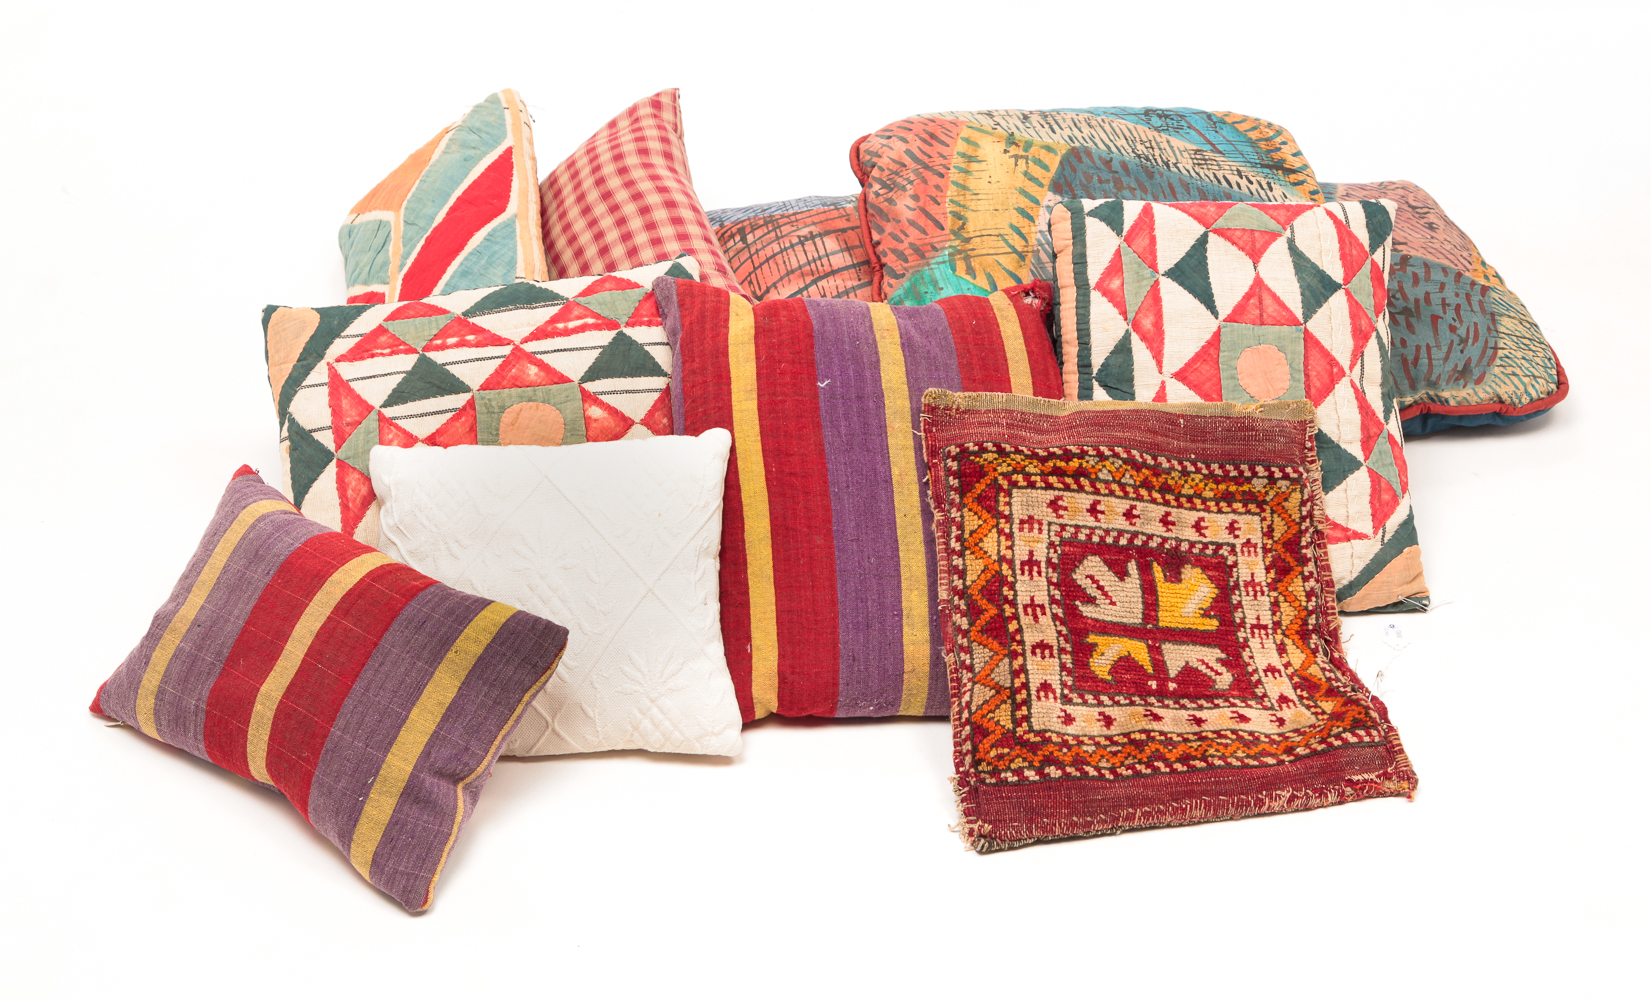 GROUP OF CONTEMPORARY FOLKSY PILLOWS.